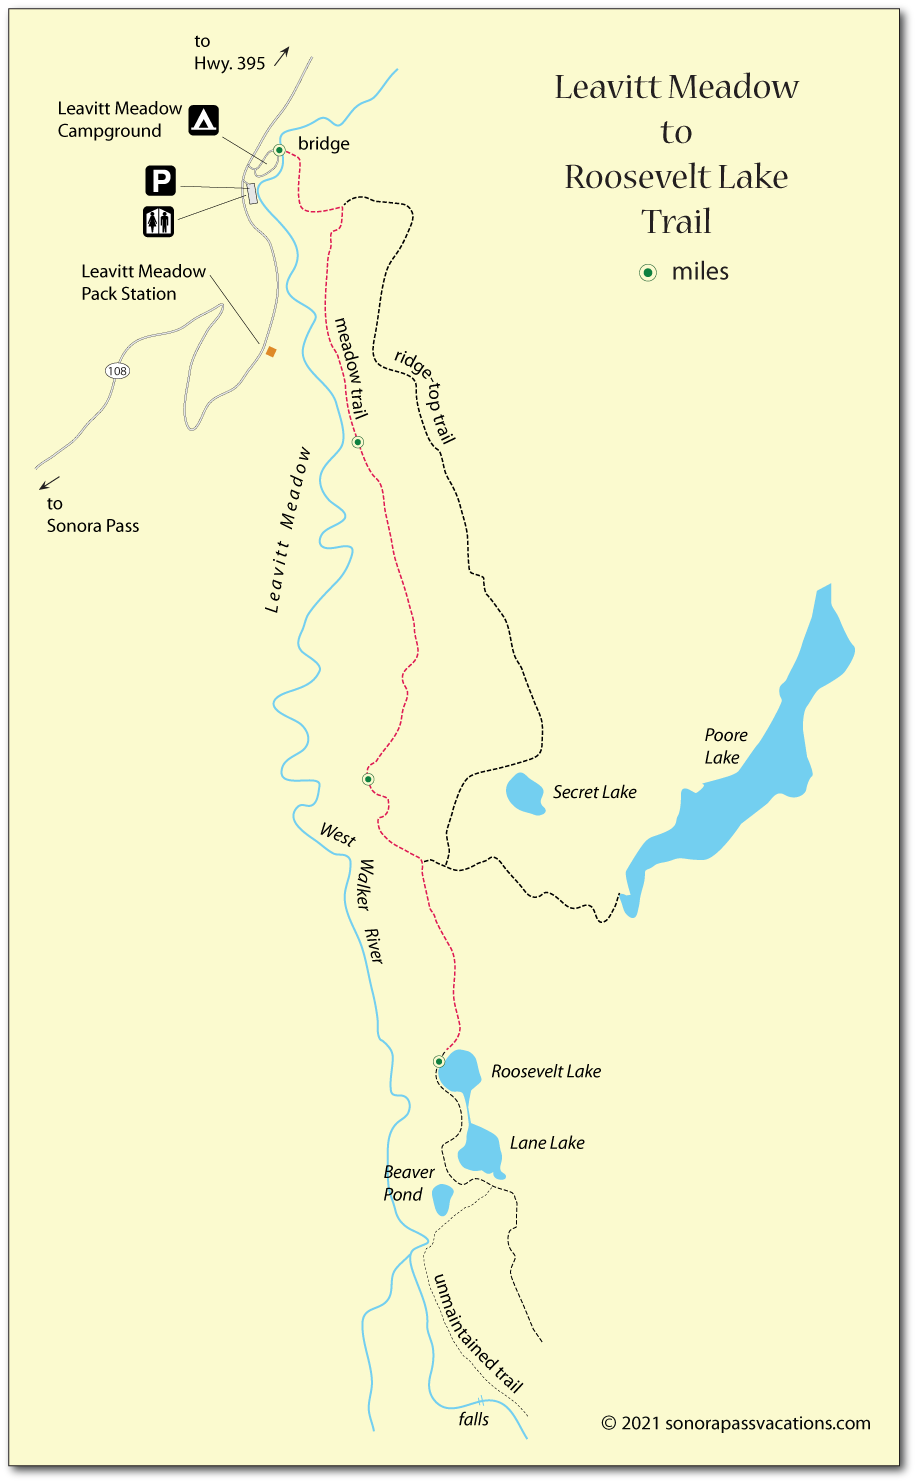 Map of the trail from Leavitt Meadow to Roosevelt Lake, Mono County, CA